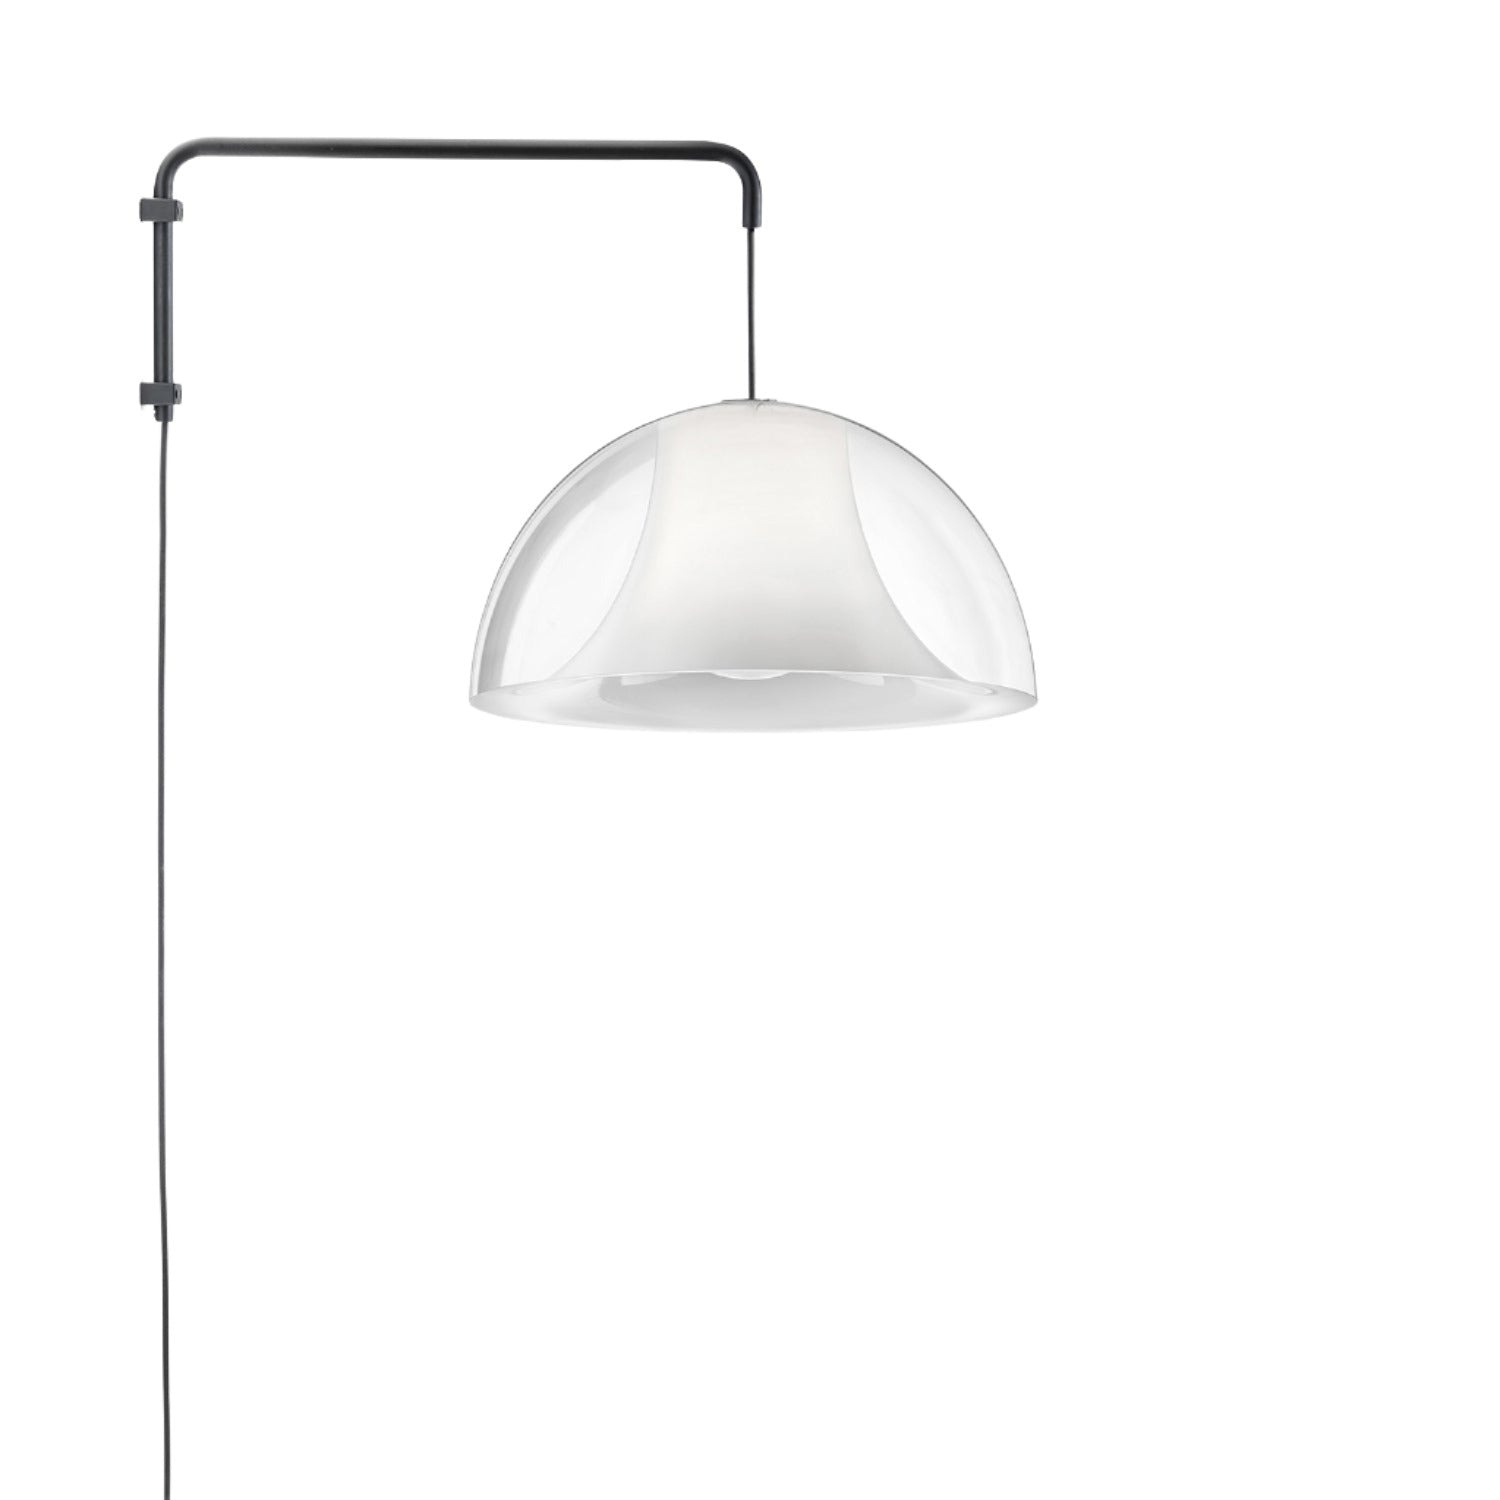 Pedrali L002 Wall light in clear shade and black fittings